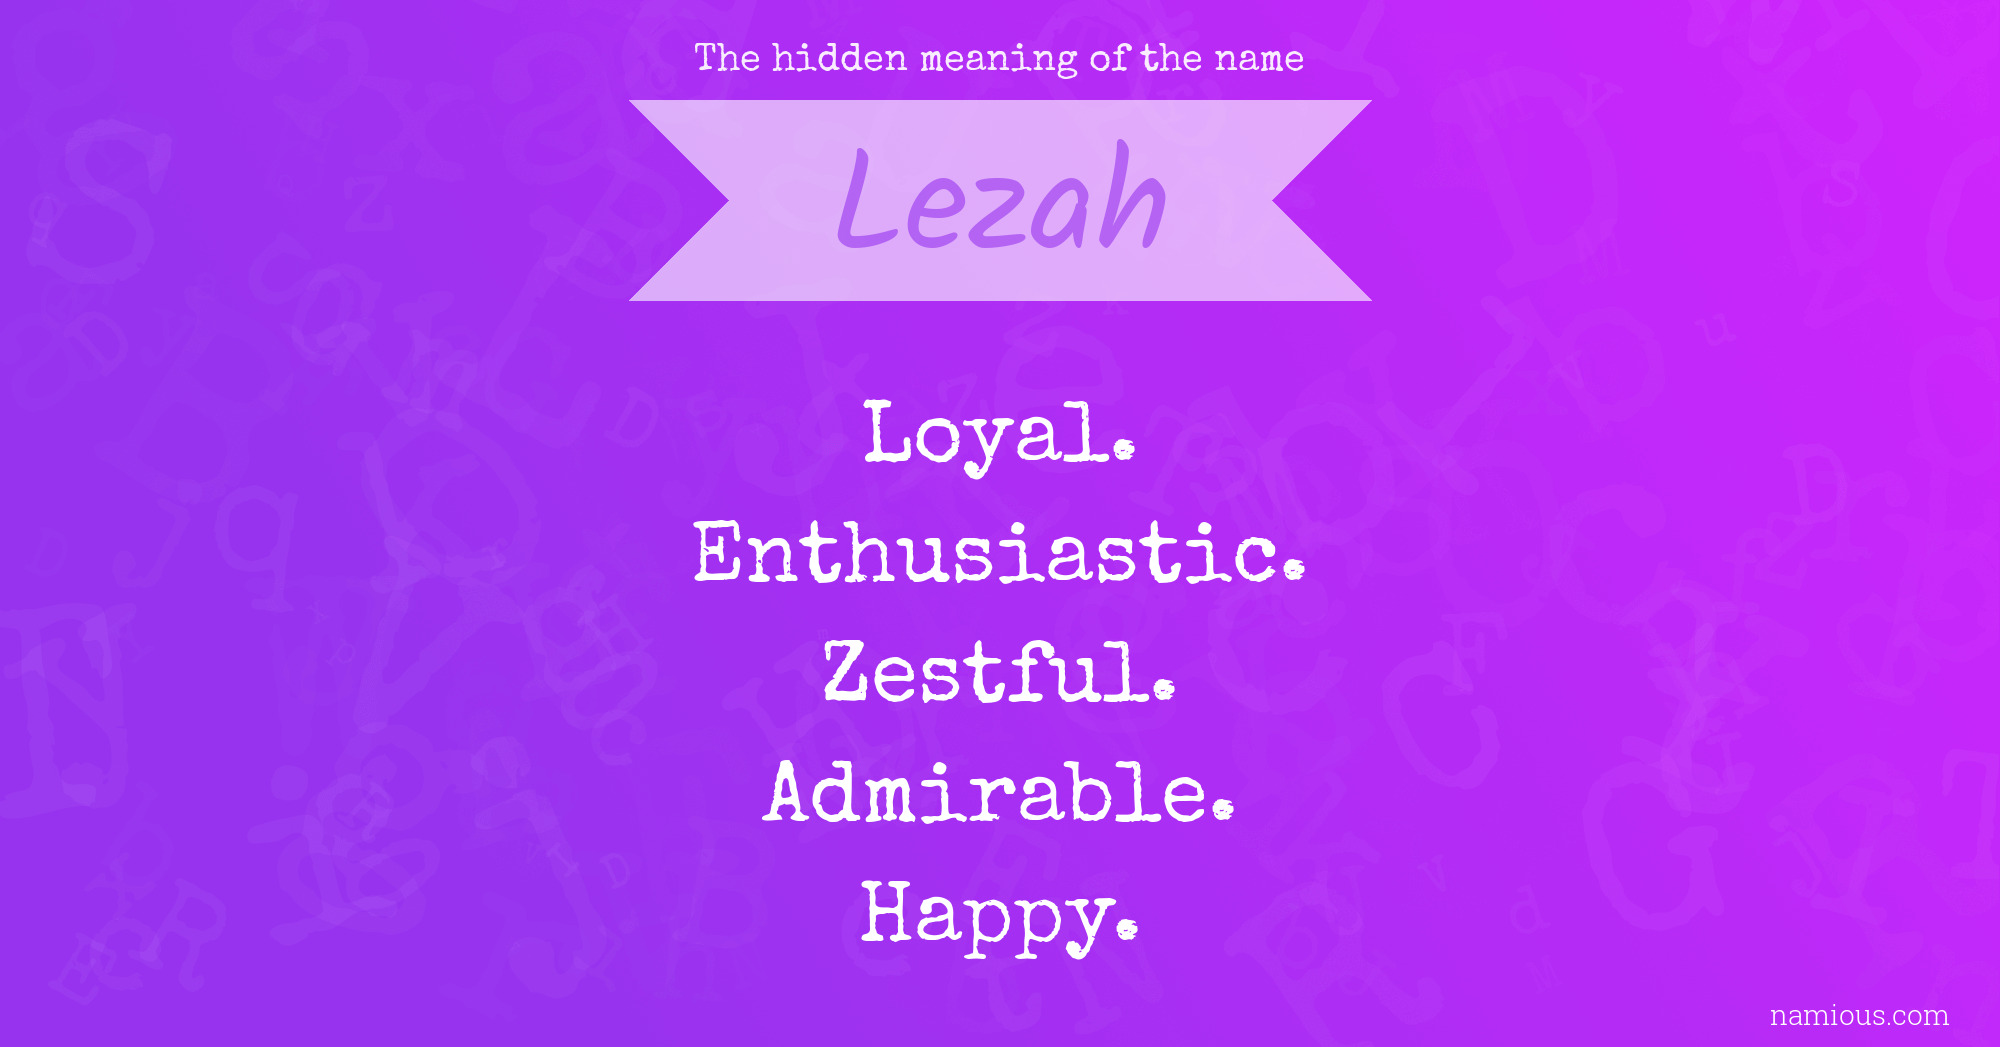 The hidden meaning of the name Lezah